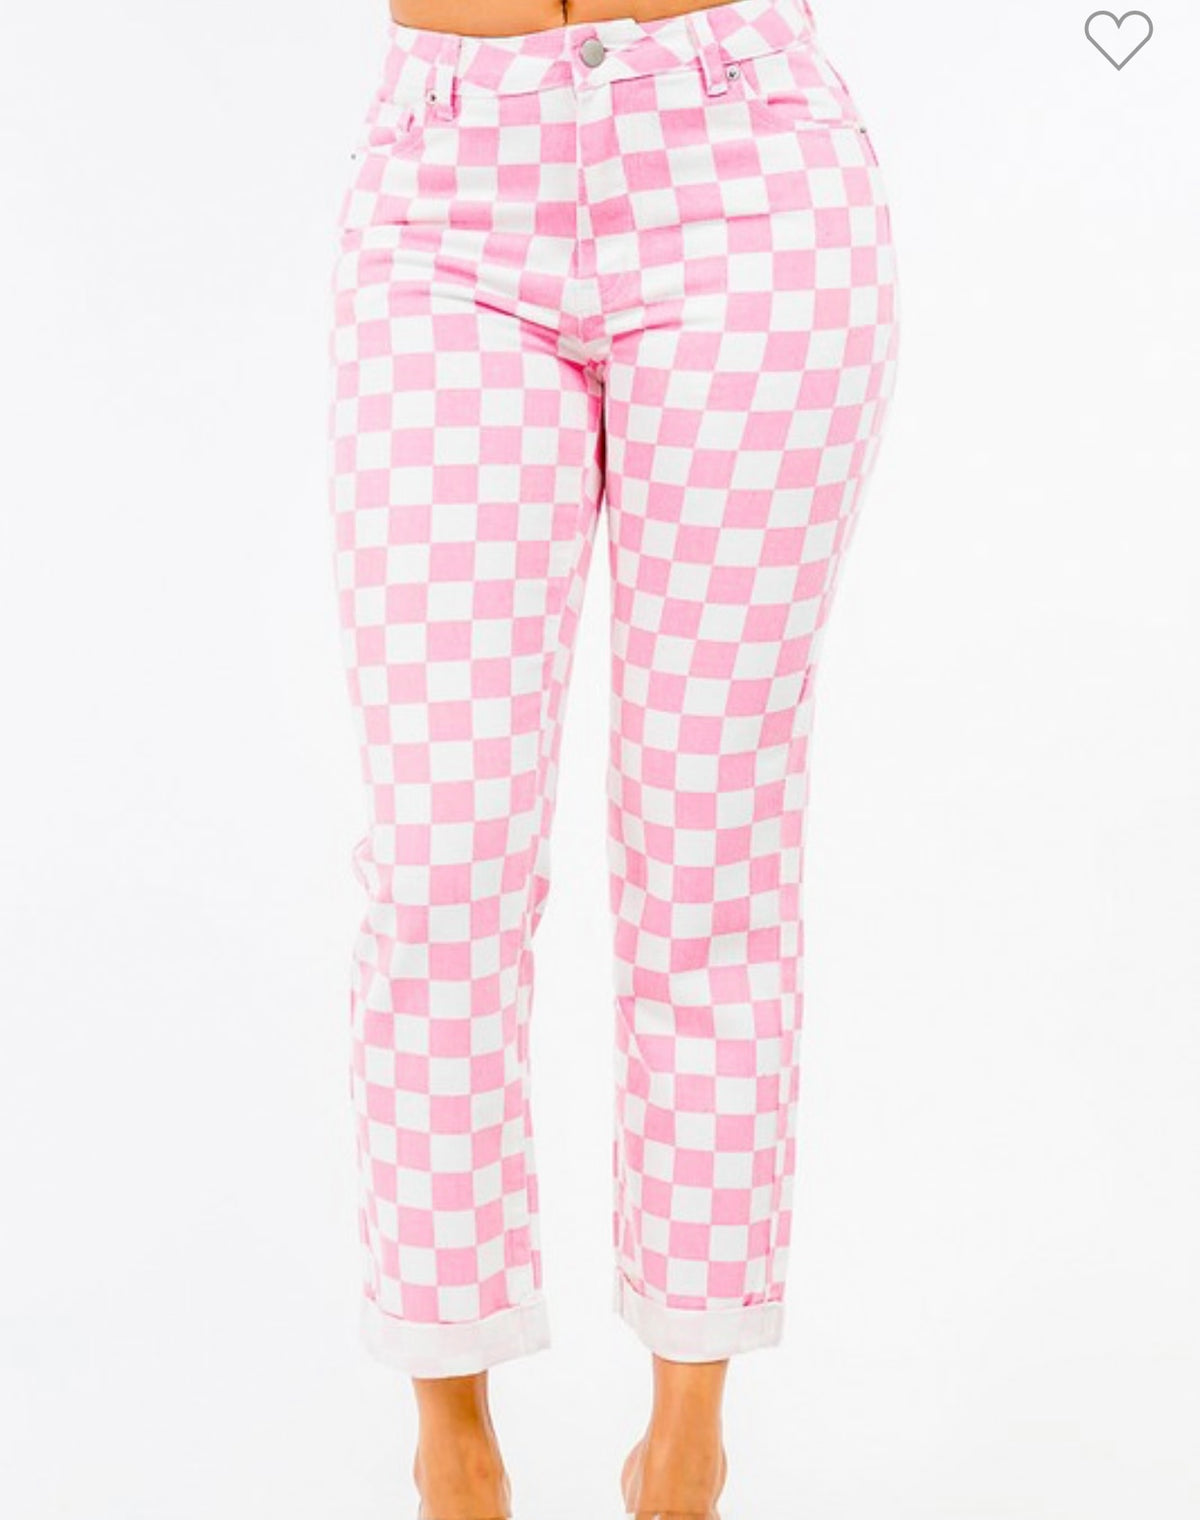 Call It Quits Checkered Pants - Pink